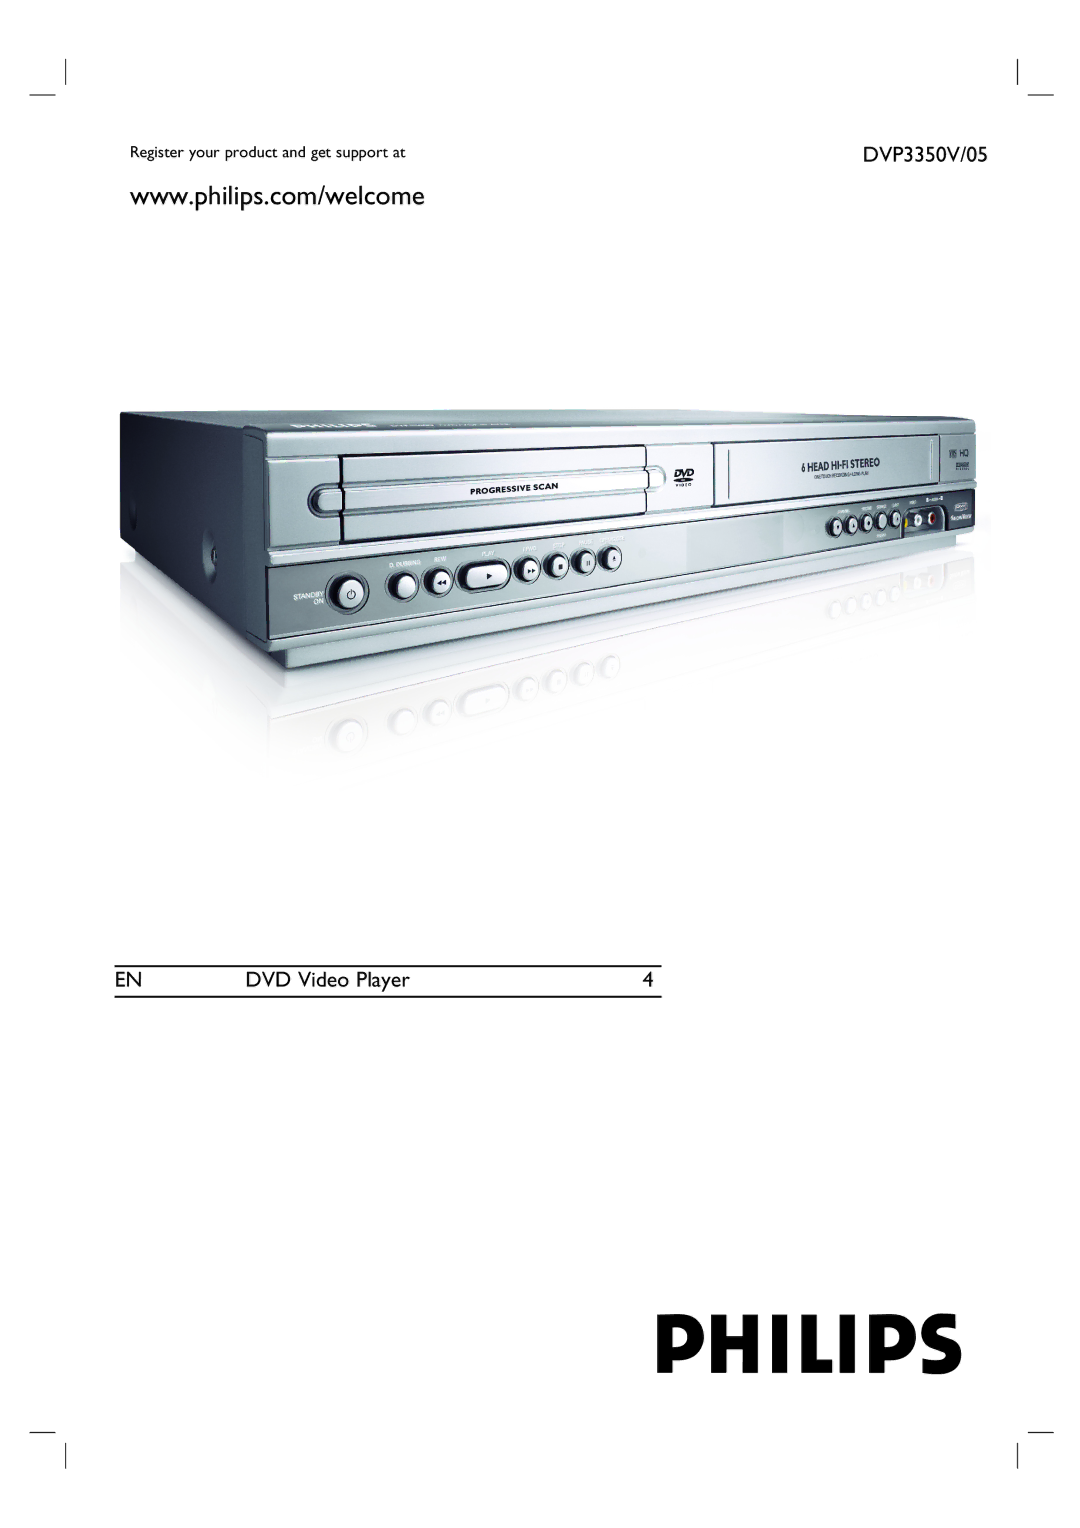 Philips DVP3350V/05 user manual DVD Video Player, Register your product and get support at 